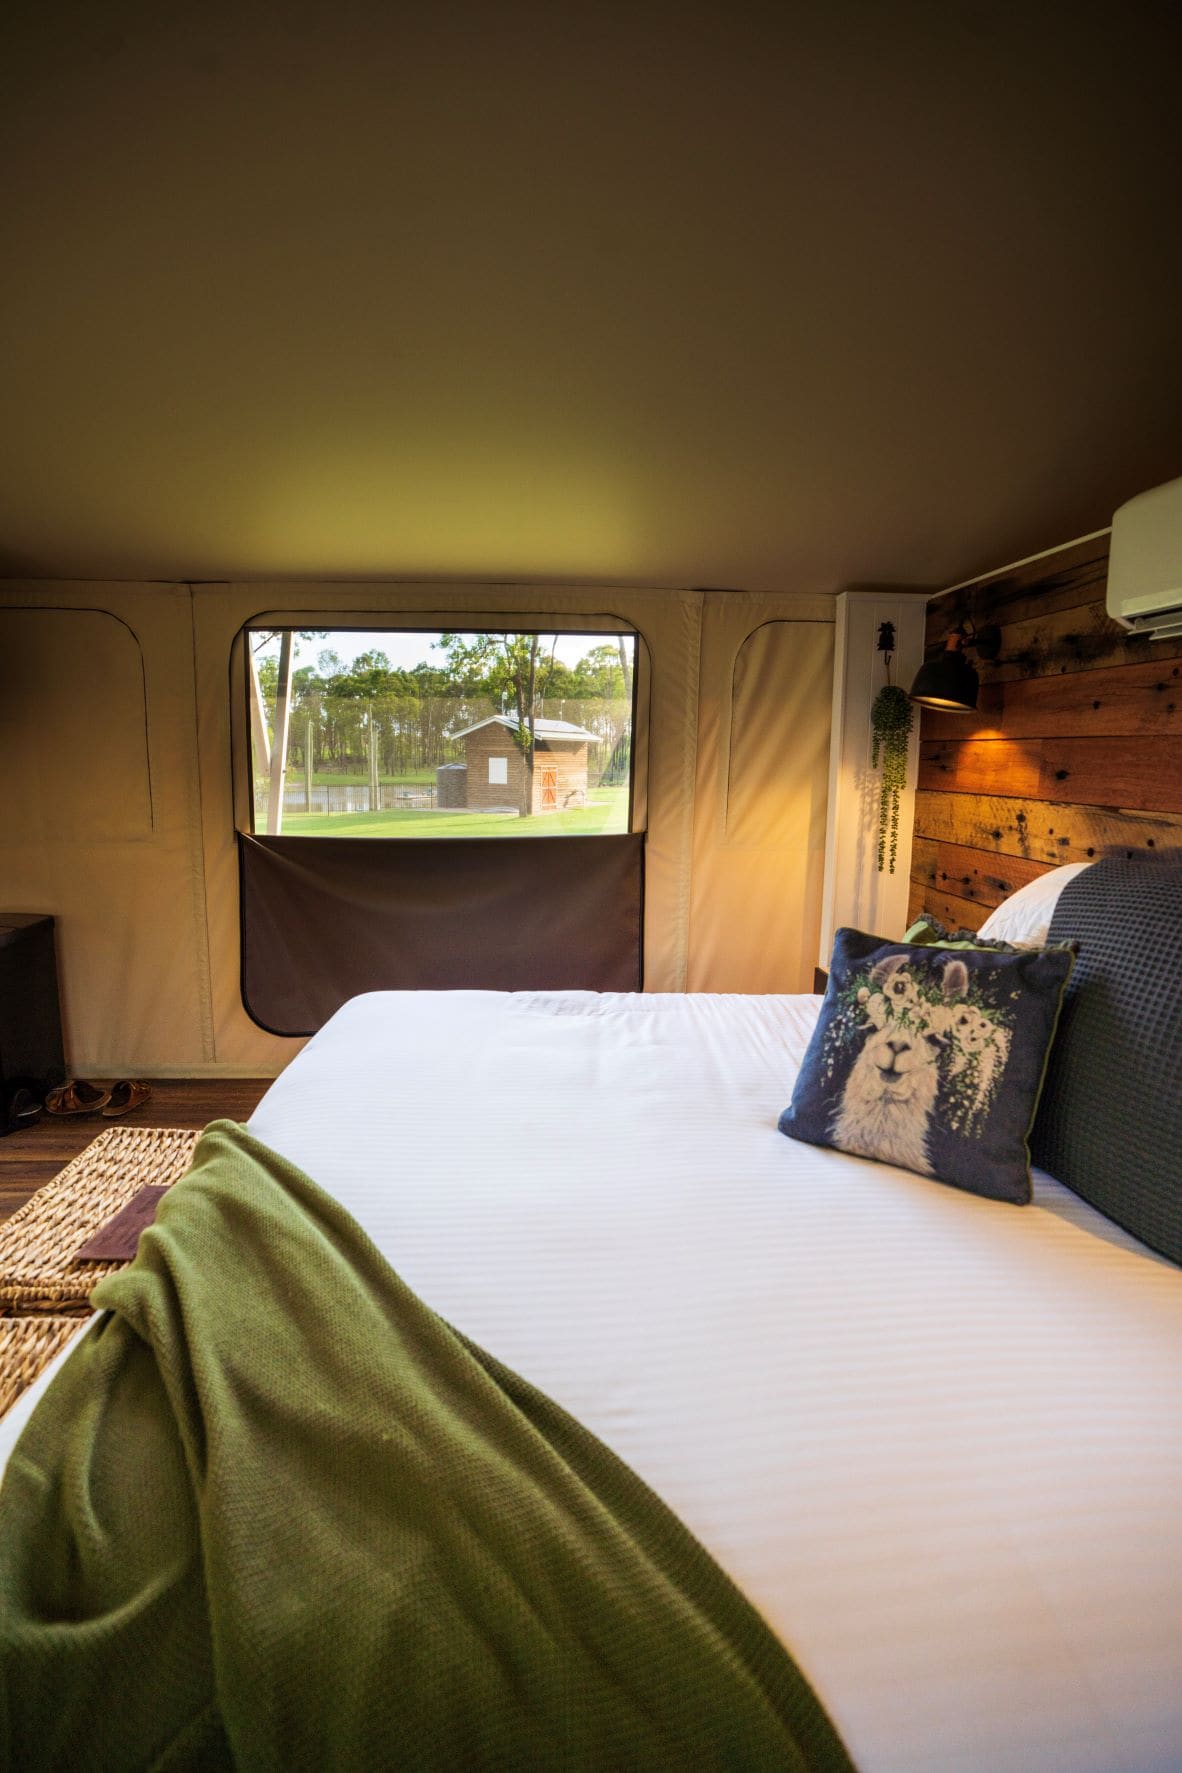 A bed in a Splitters Ram glamping tent in Bundaberg 